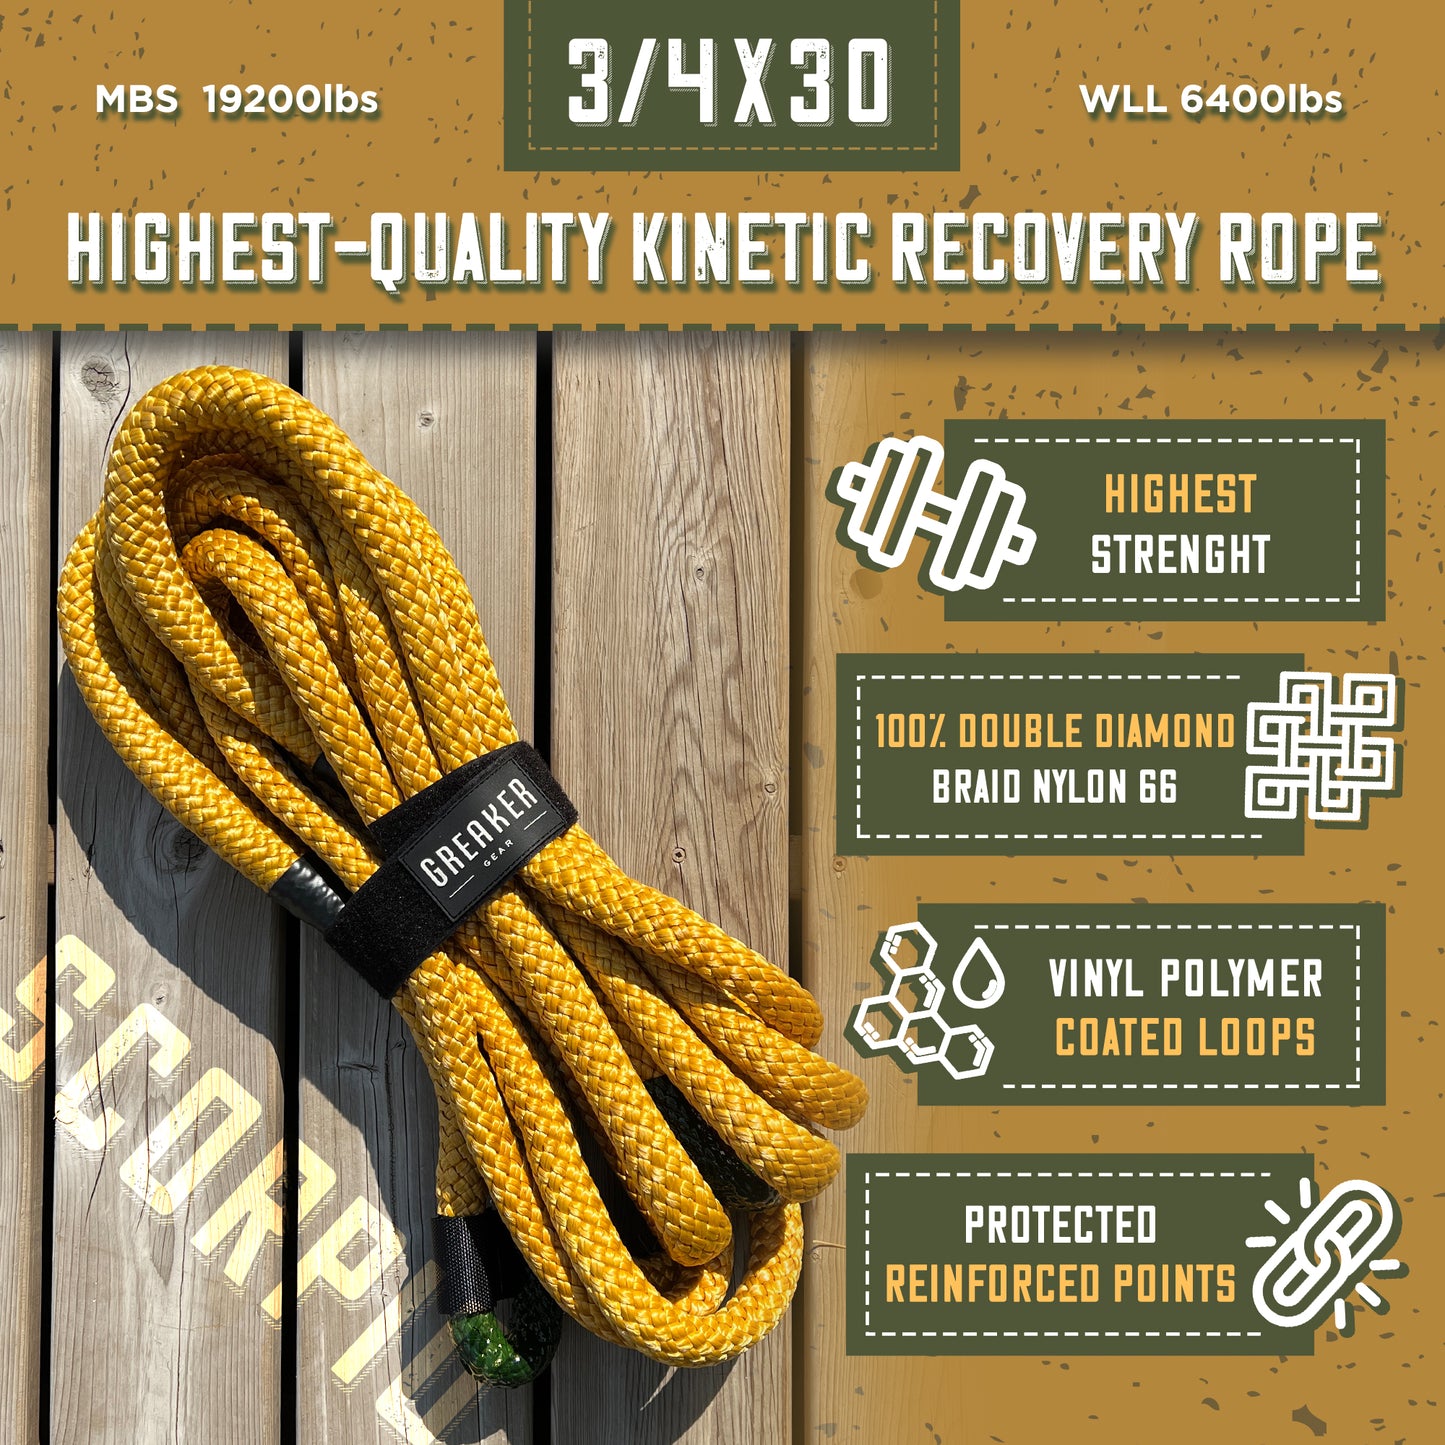 Greaker Limited Edition Kinetic Recovery Tow Rope Heavy Duty Offroad - Unique 4x4 Style (Gold Sahara, 3/4" x30')